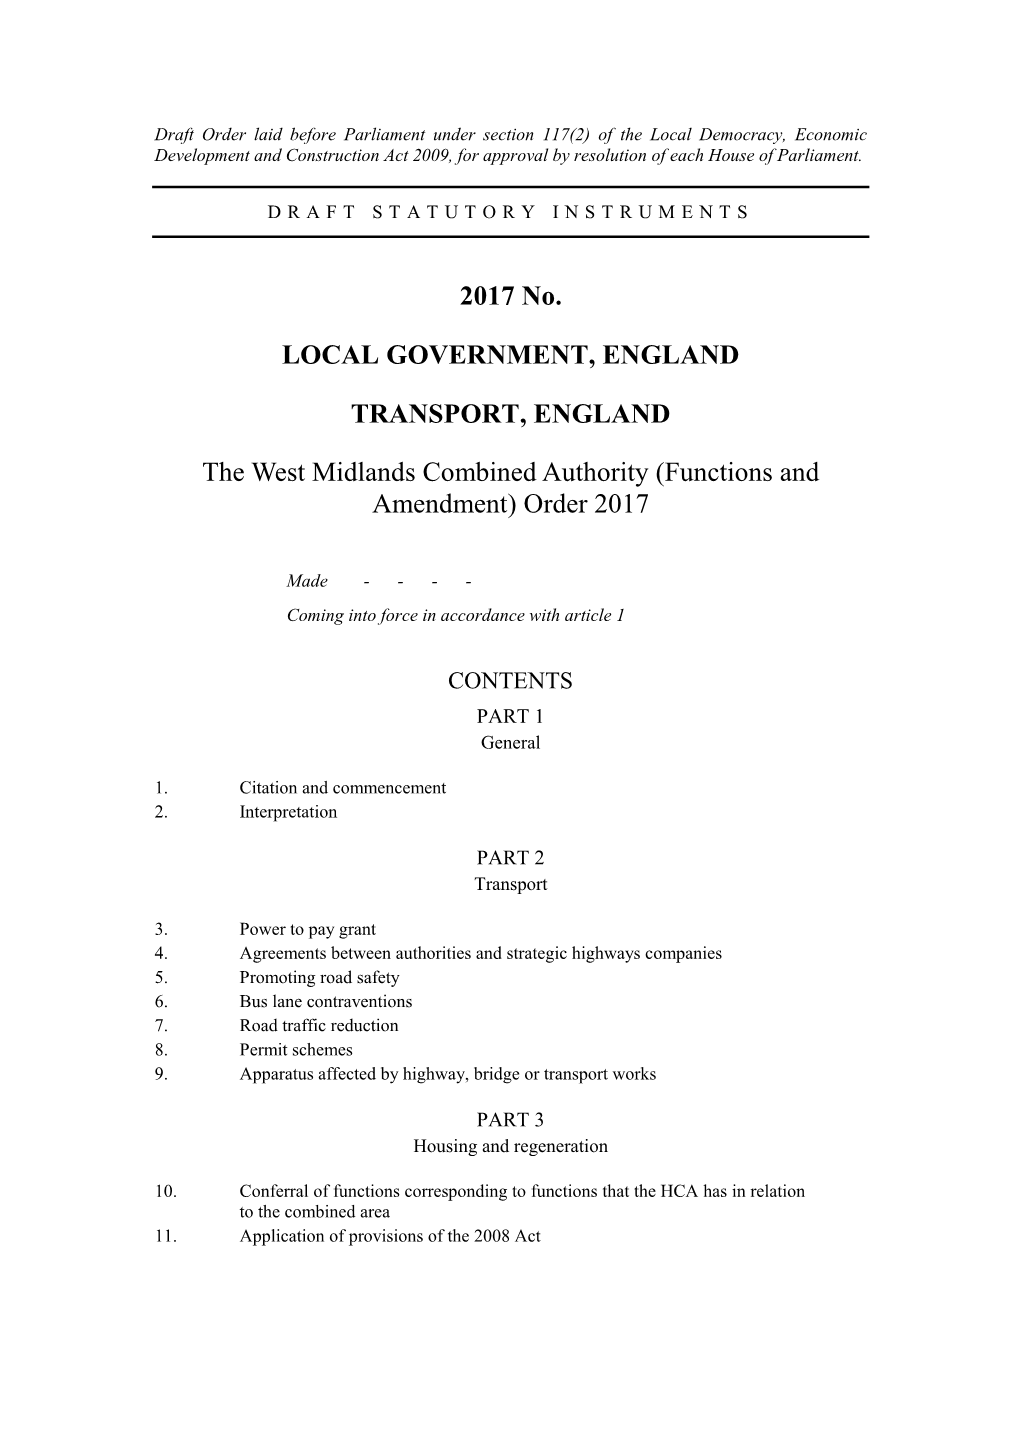 The West Midlands Combined Authority (Functions and Amendment) Order 2017